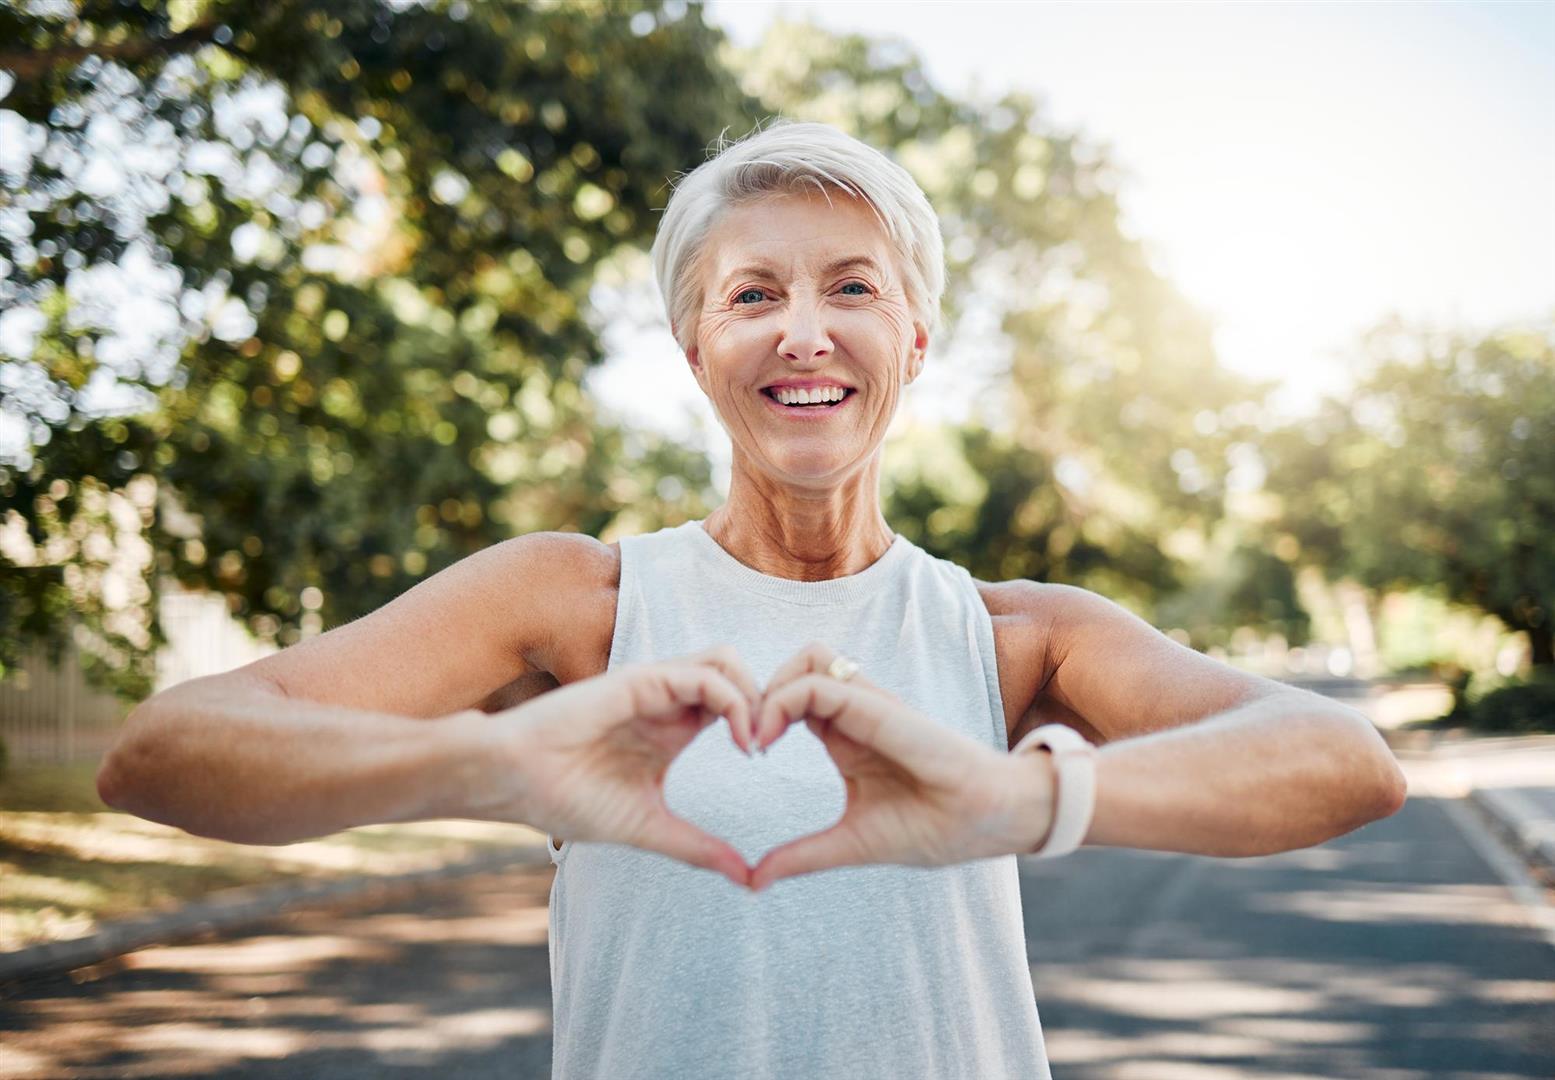 fitness-happy-heart-hands-old-woman-nature-after-running-health-wellness-workout-smile-motivation-peace-with-senior-lady-sign-love-faith-training-nature (Large)